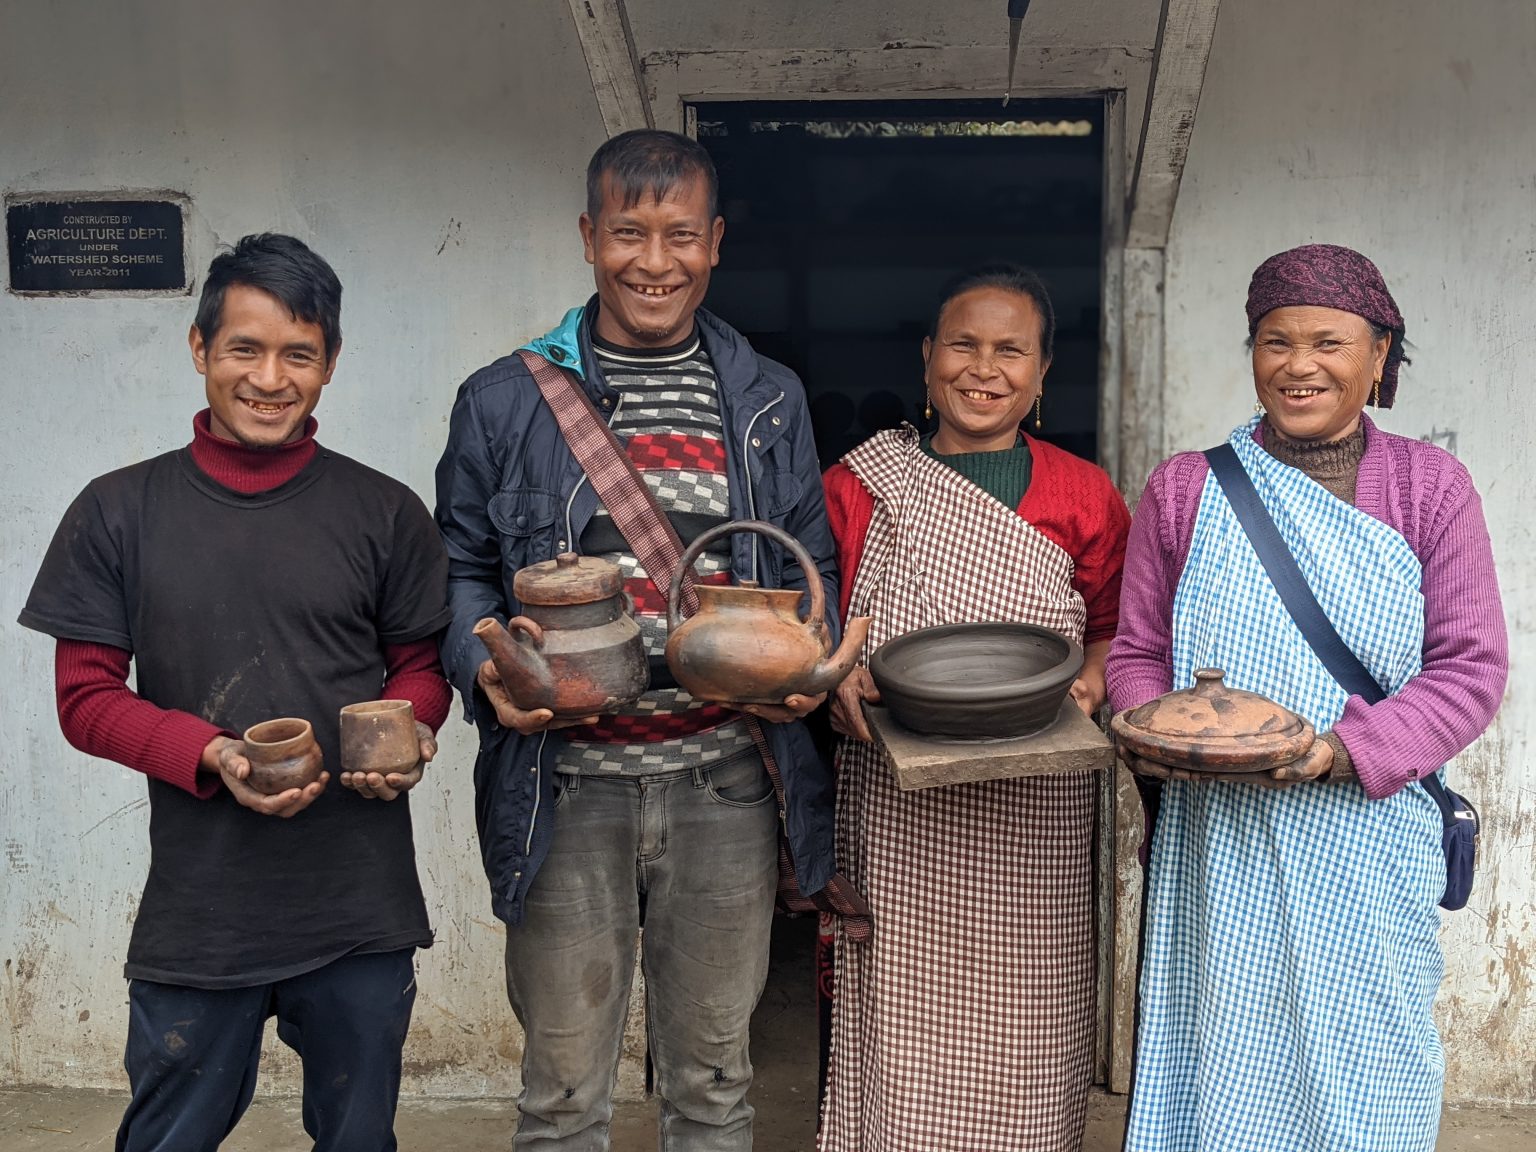  <a href=/black-clay-pottery-well-preserved-traditional-knowledge/  class=""> <div class="text-slider">
 
     MEGHALAYA BASIN MANAGEMENT AGENCY <br/>
        
       <p class="text-lg"> ENVIRONMENT | ENTERPRENEURSHIP | MARKETS | FINANCE </p>   </div></a> <br/>